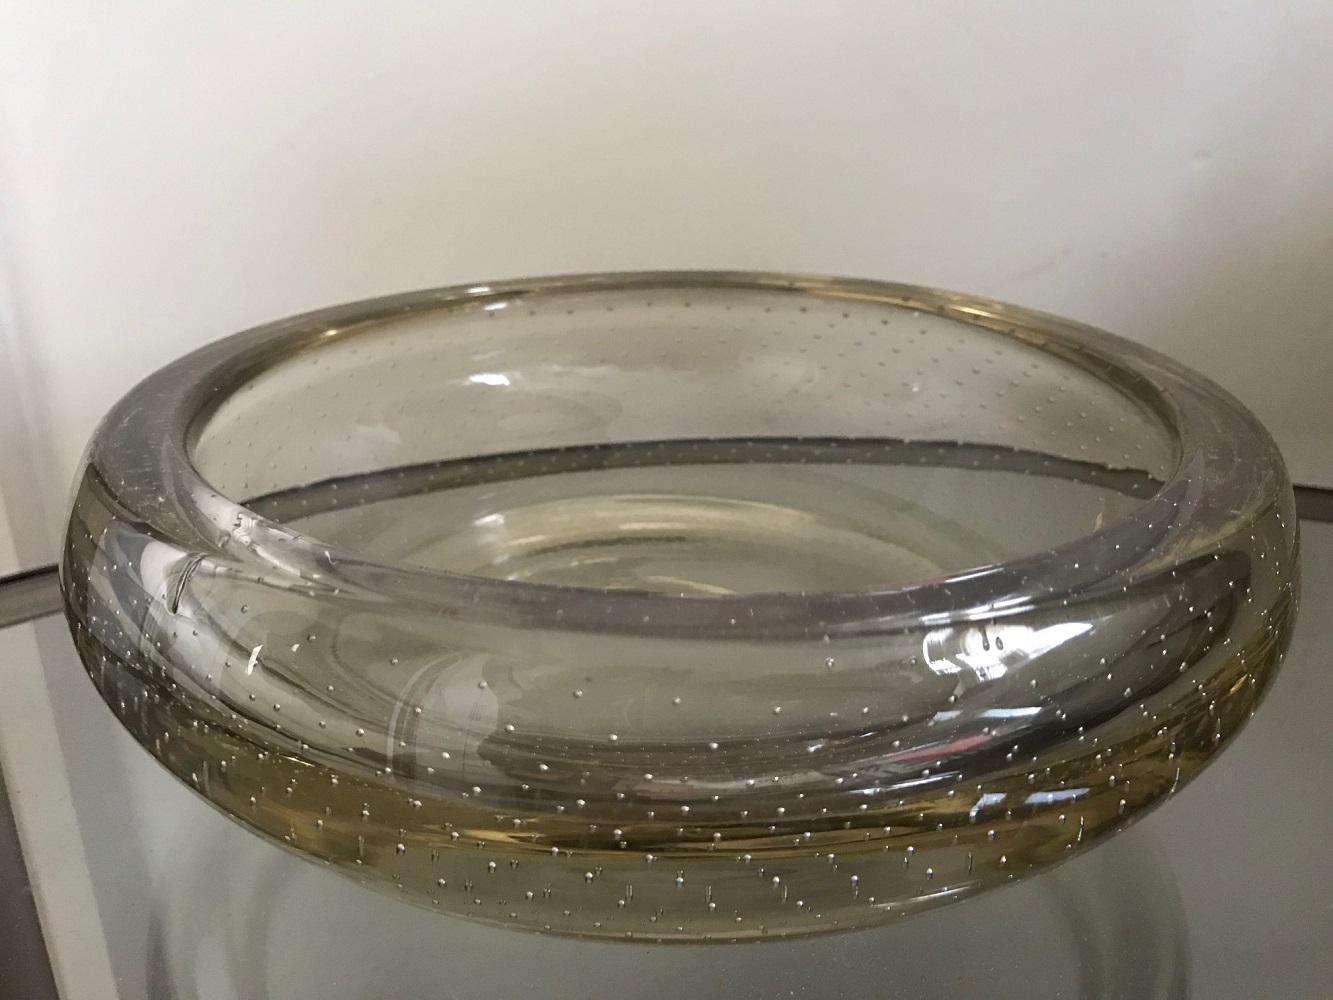 A large heavy controlled bubble glass vide poche or bowl. Clear glass with a slight gold tint. No makers mark, but think it is Italian. Good pontil and in very good condition. Beautiful decorative object, which would complement any interior.